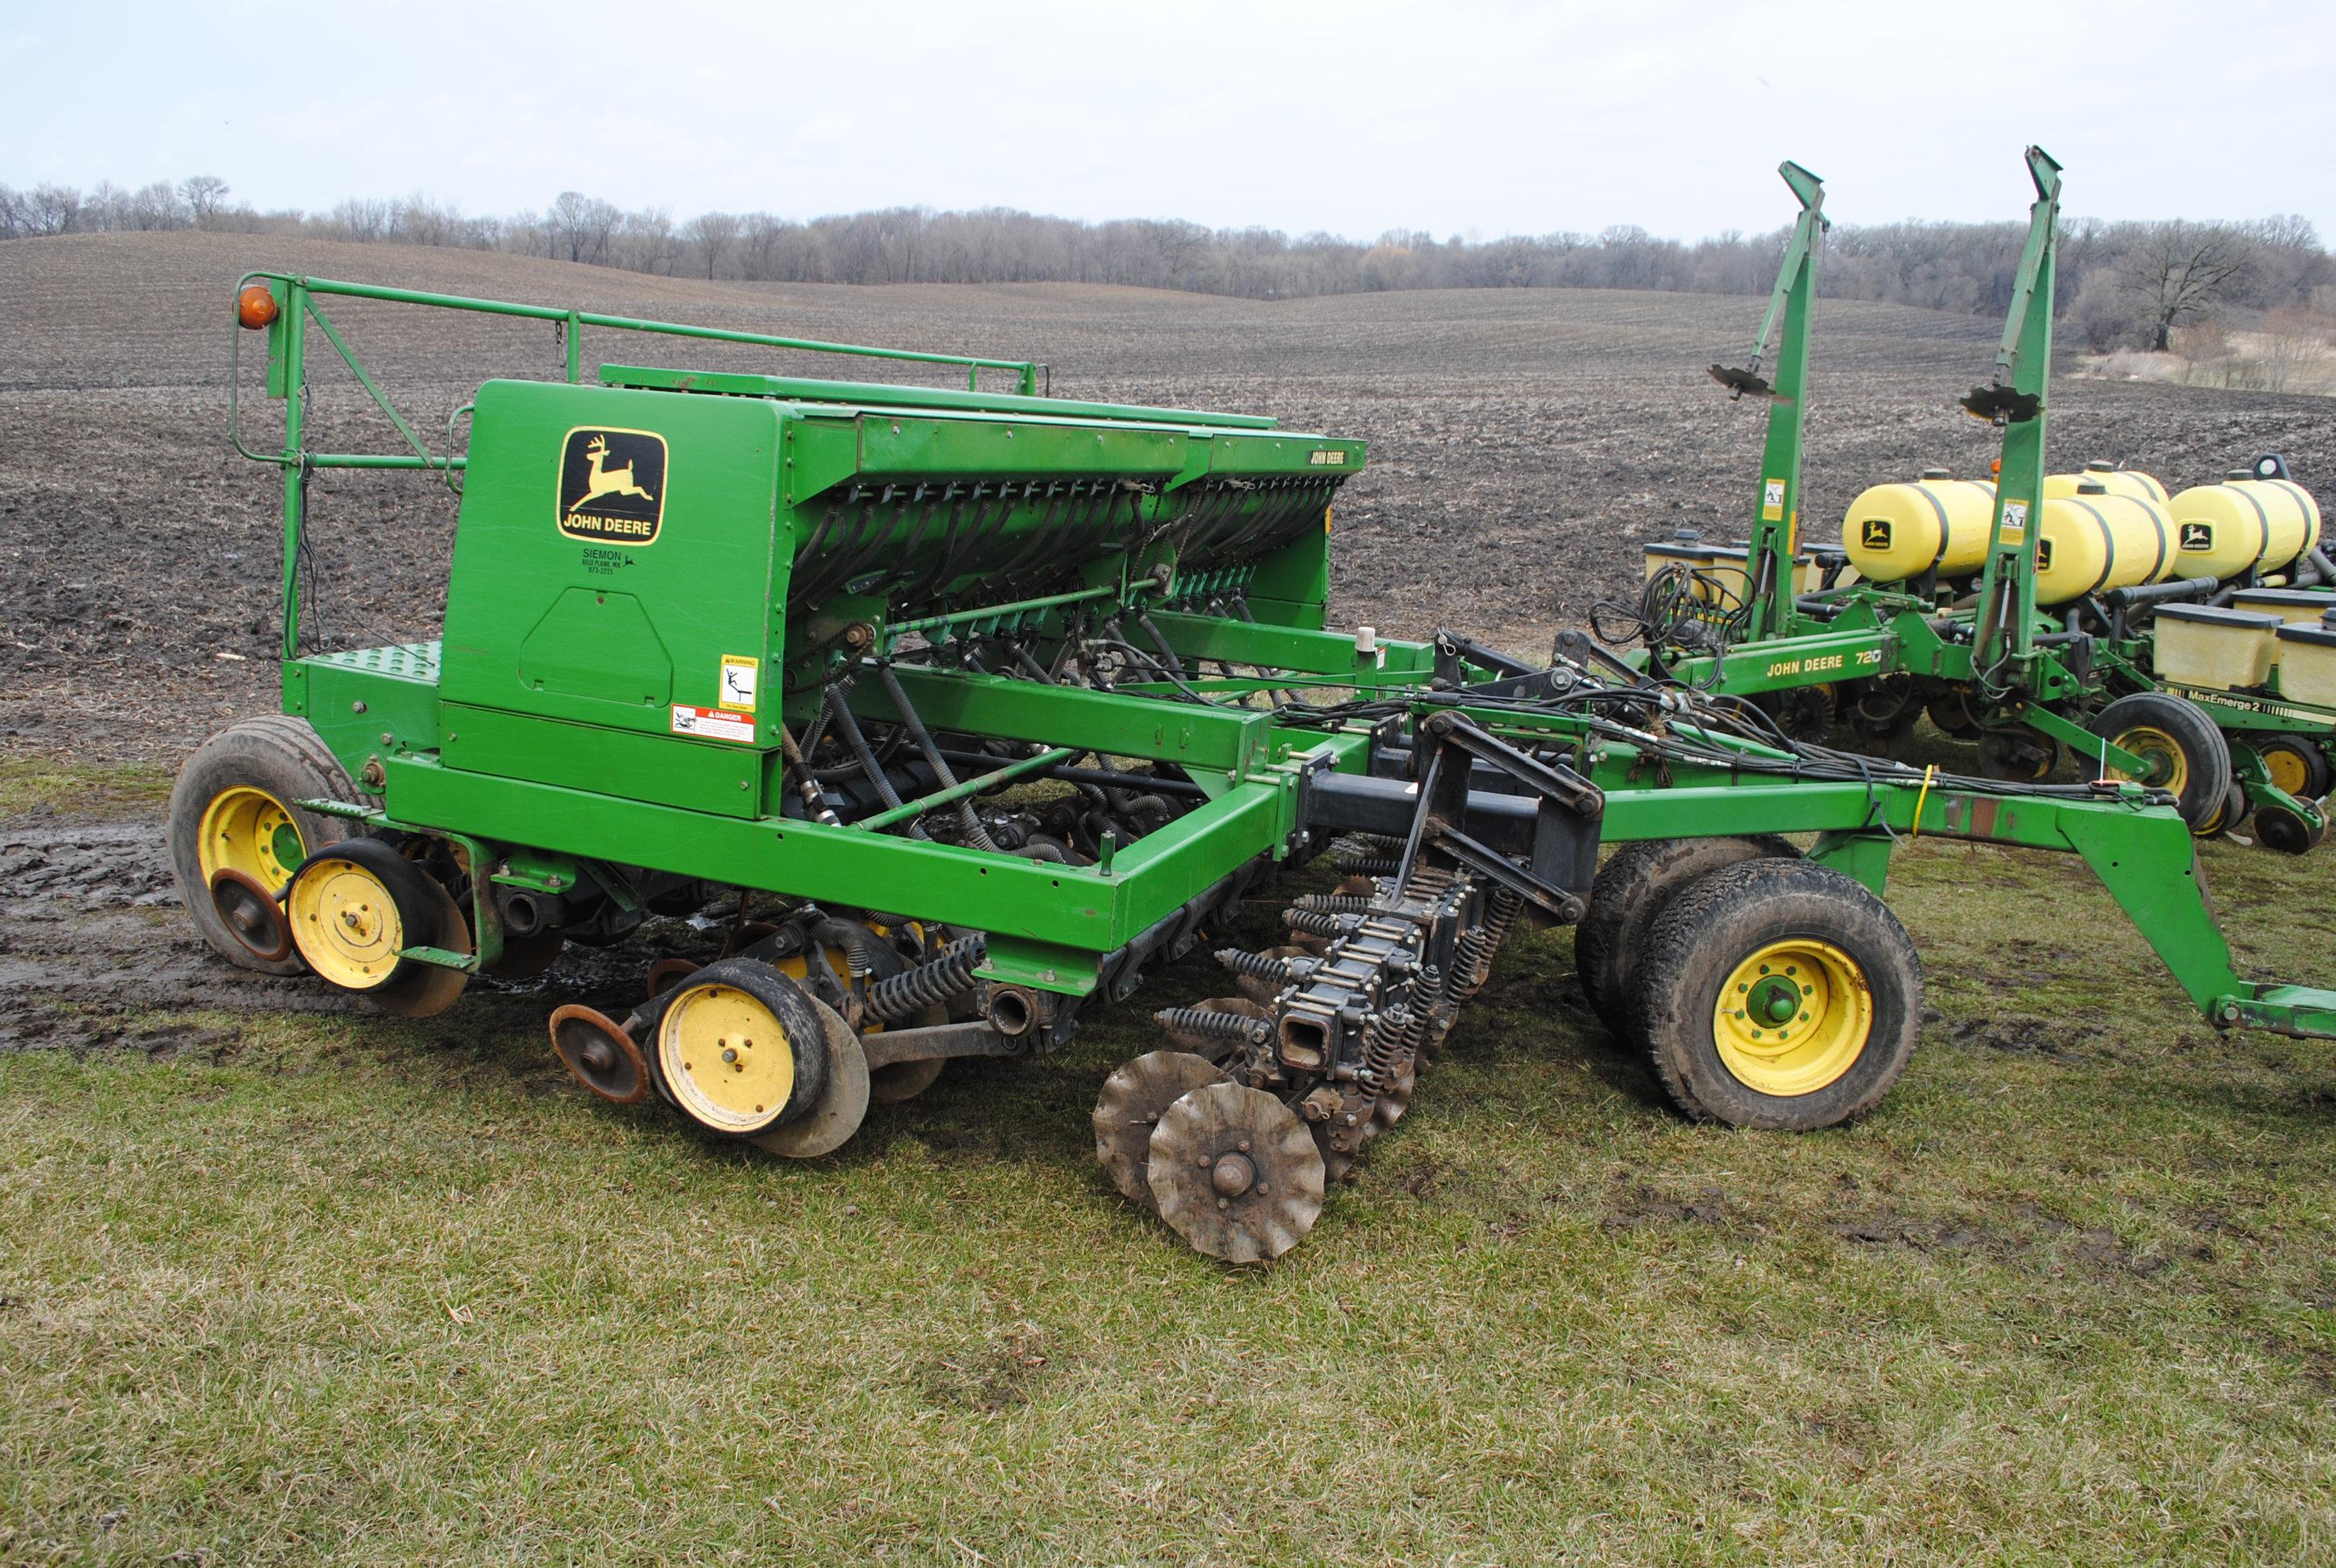 John Deere 750 15' No-Till Bean Drill with Grass Seeder, 7-1/2" spacing, front dolly wheels, cast cl